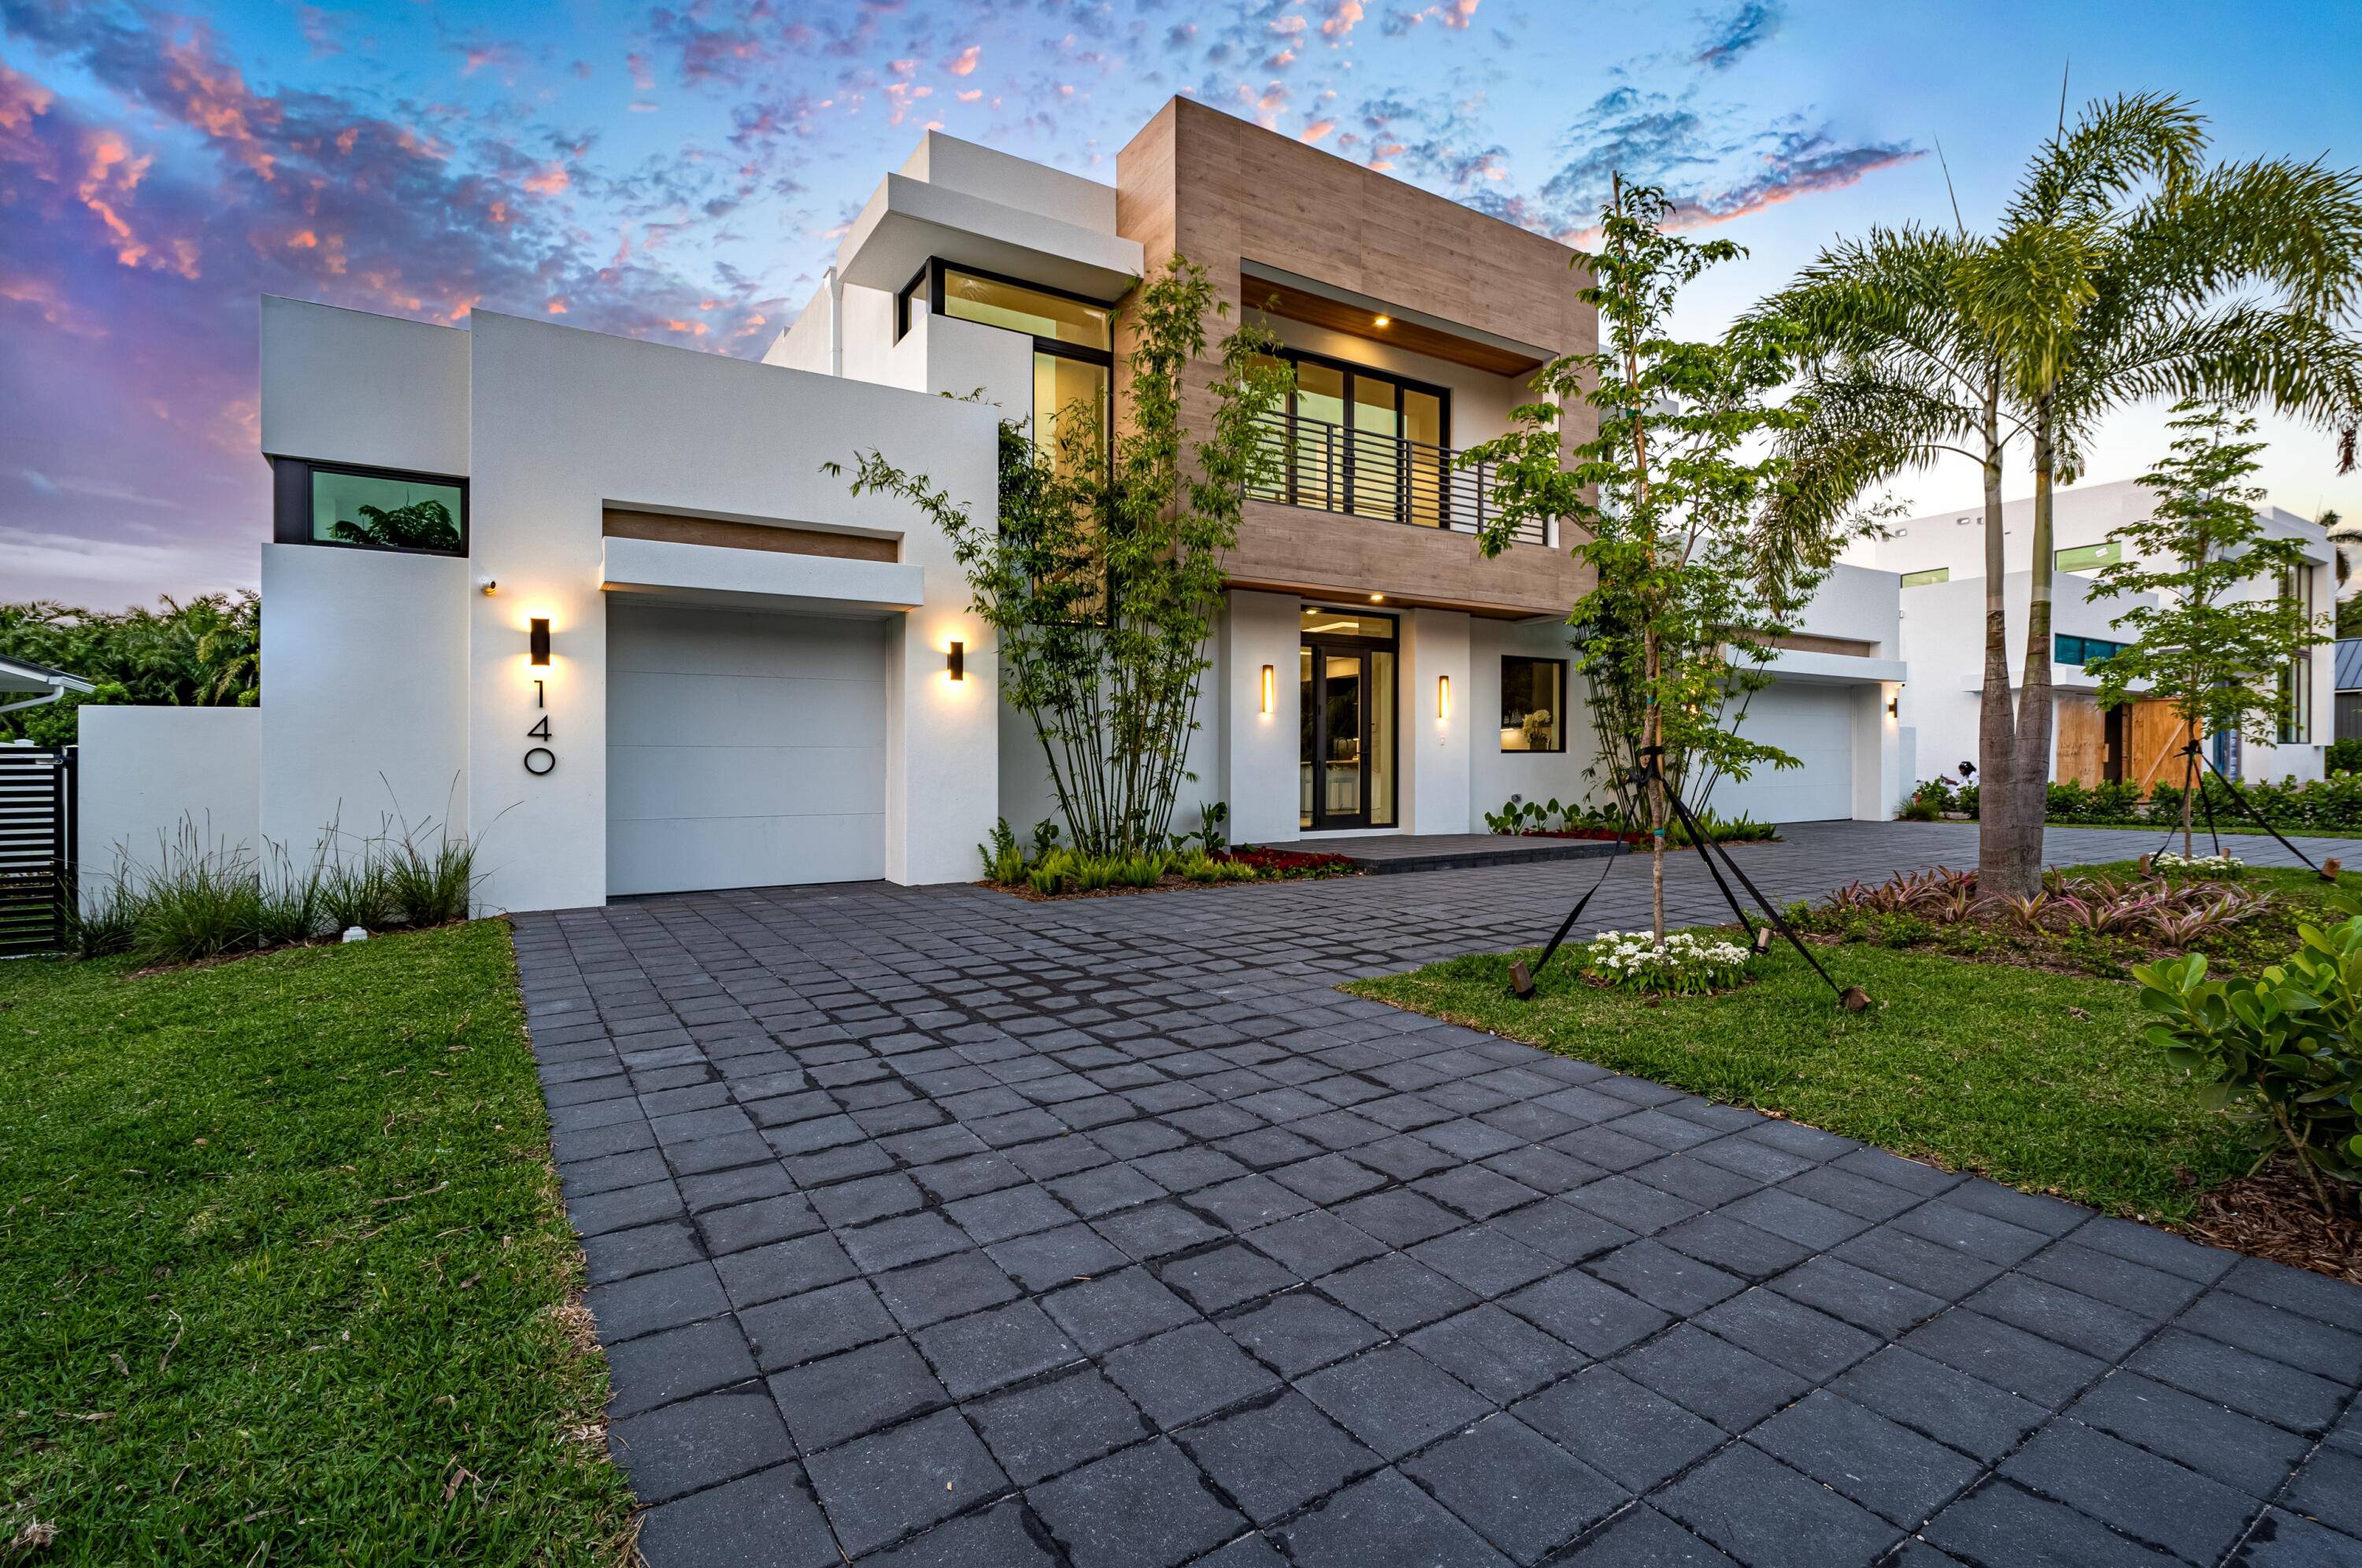 Discover 140 Pineapple Road.